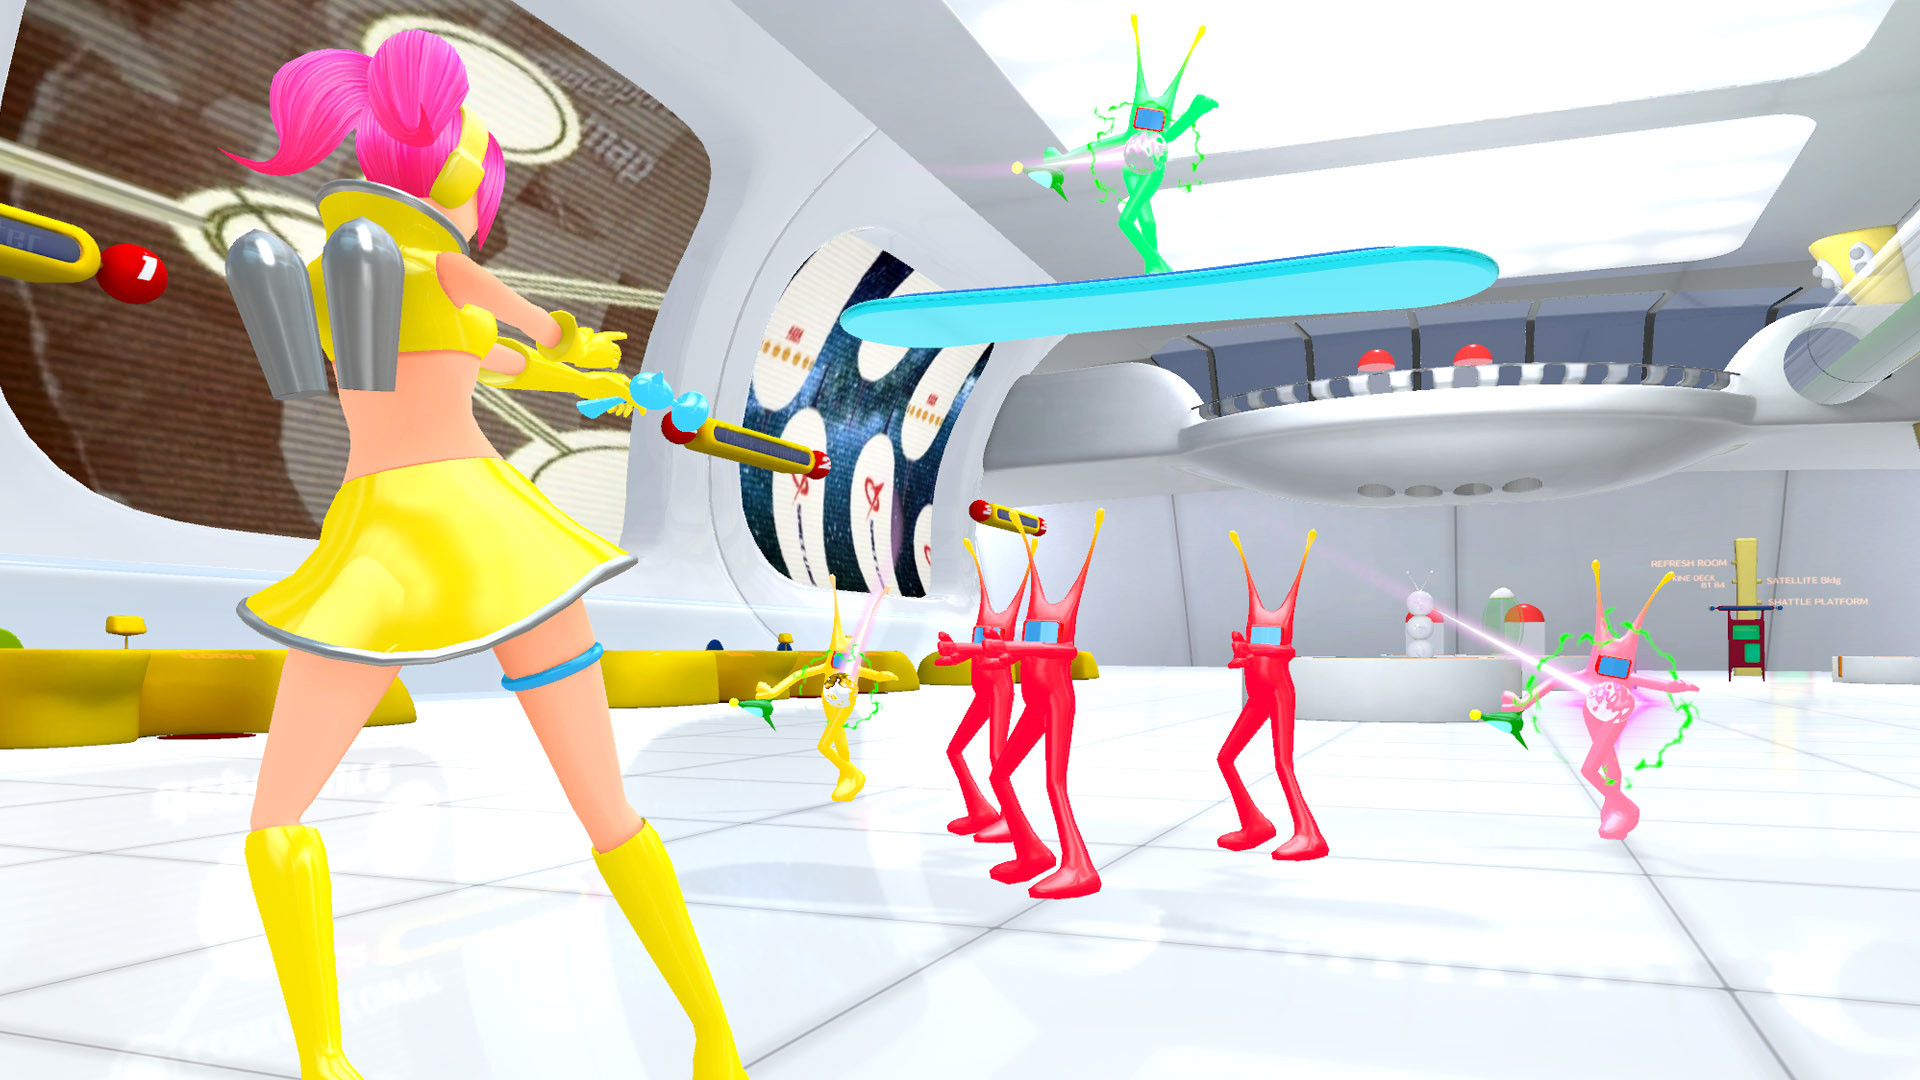 Space Channel 5 VR Kinda Funky News Flash!